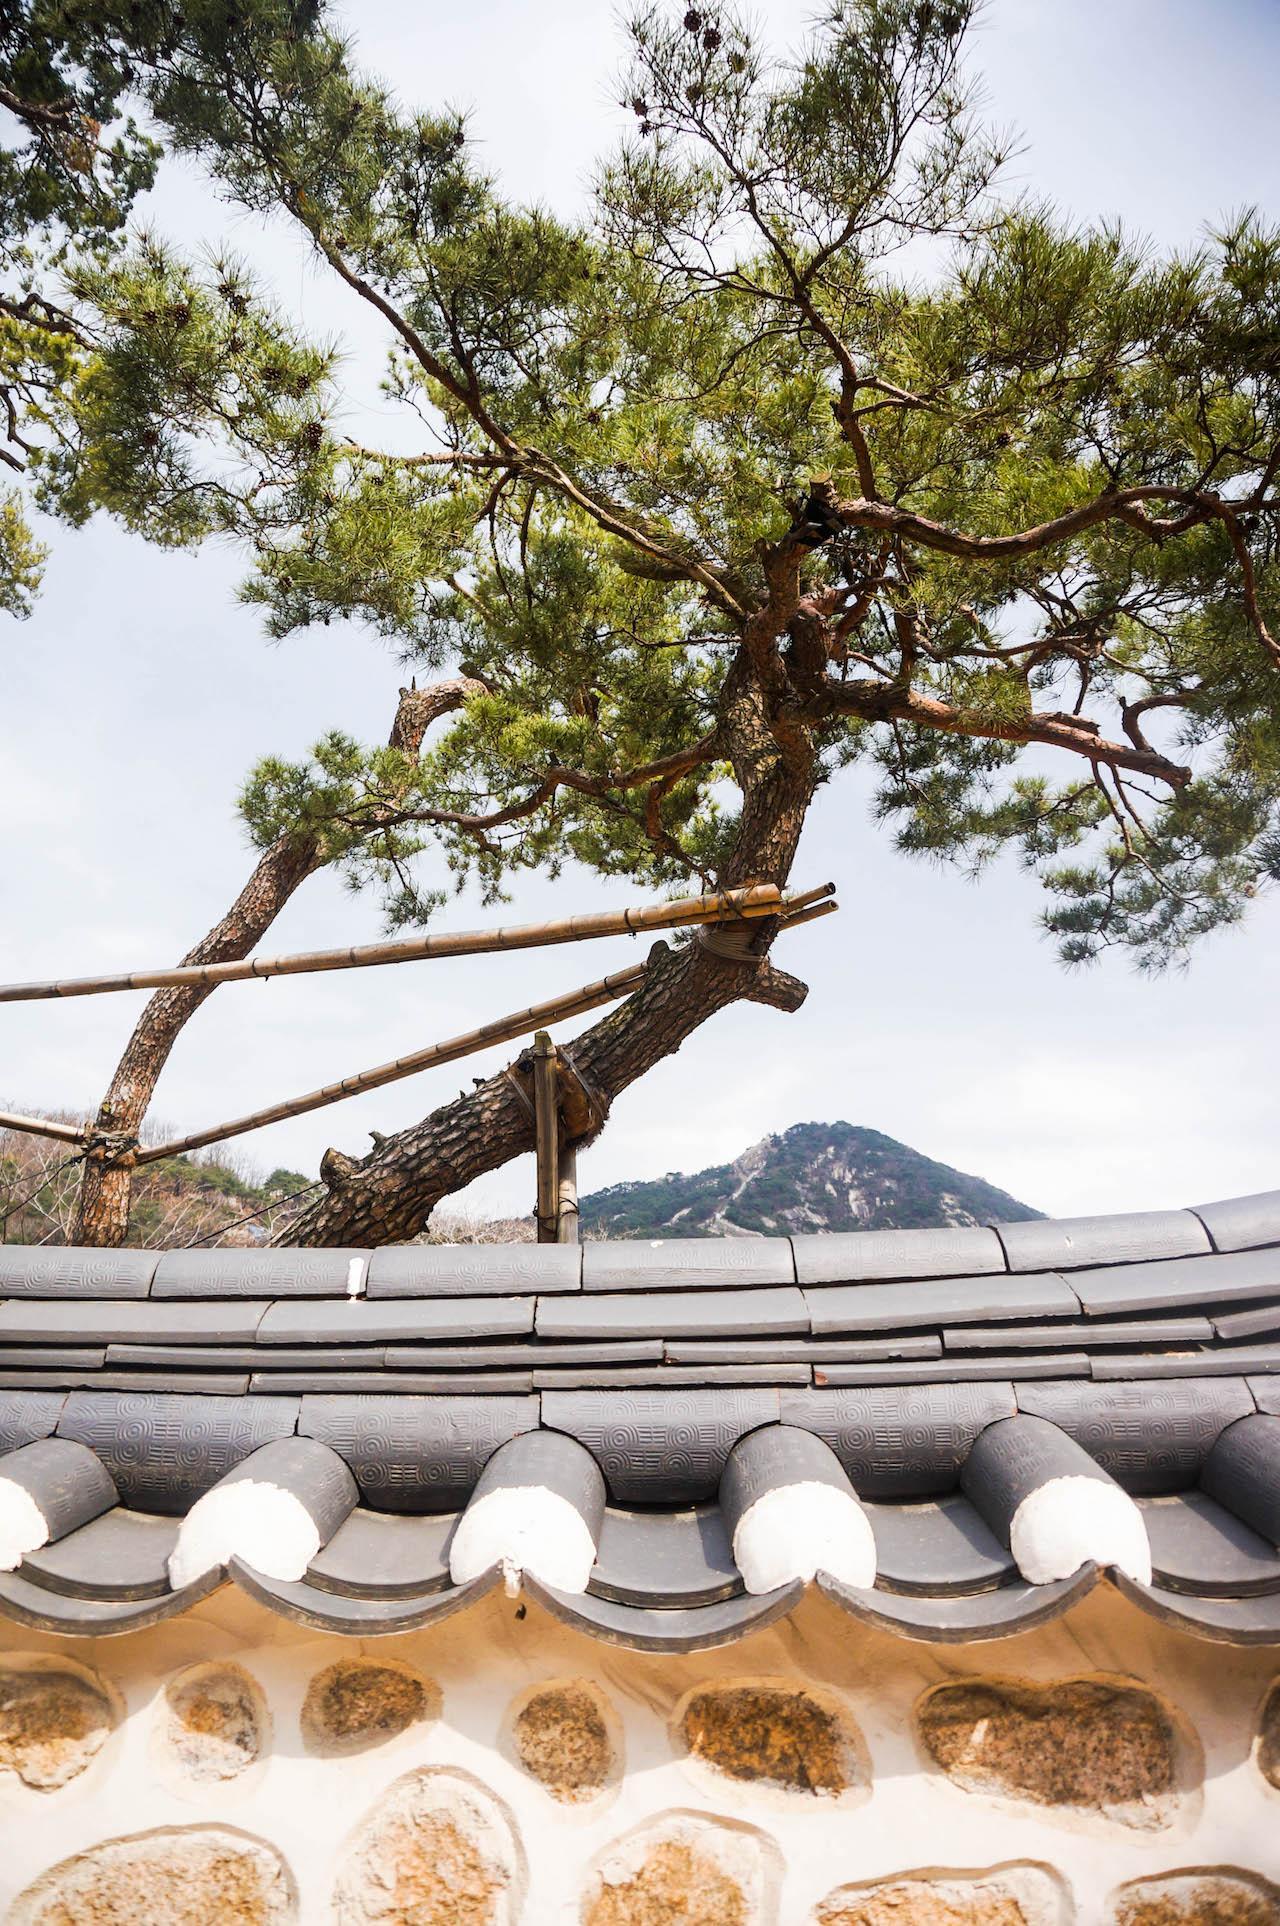 Scenic view of Seokpajeong pavilion in nature with trees, clouds, and twigs.